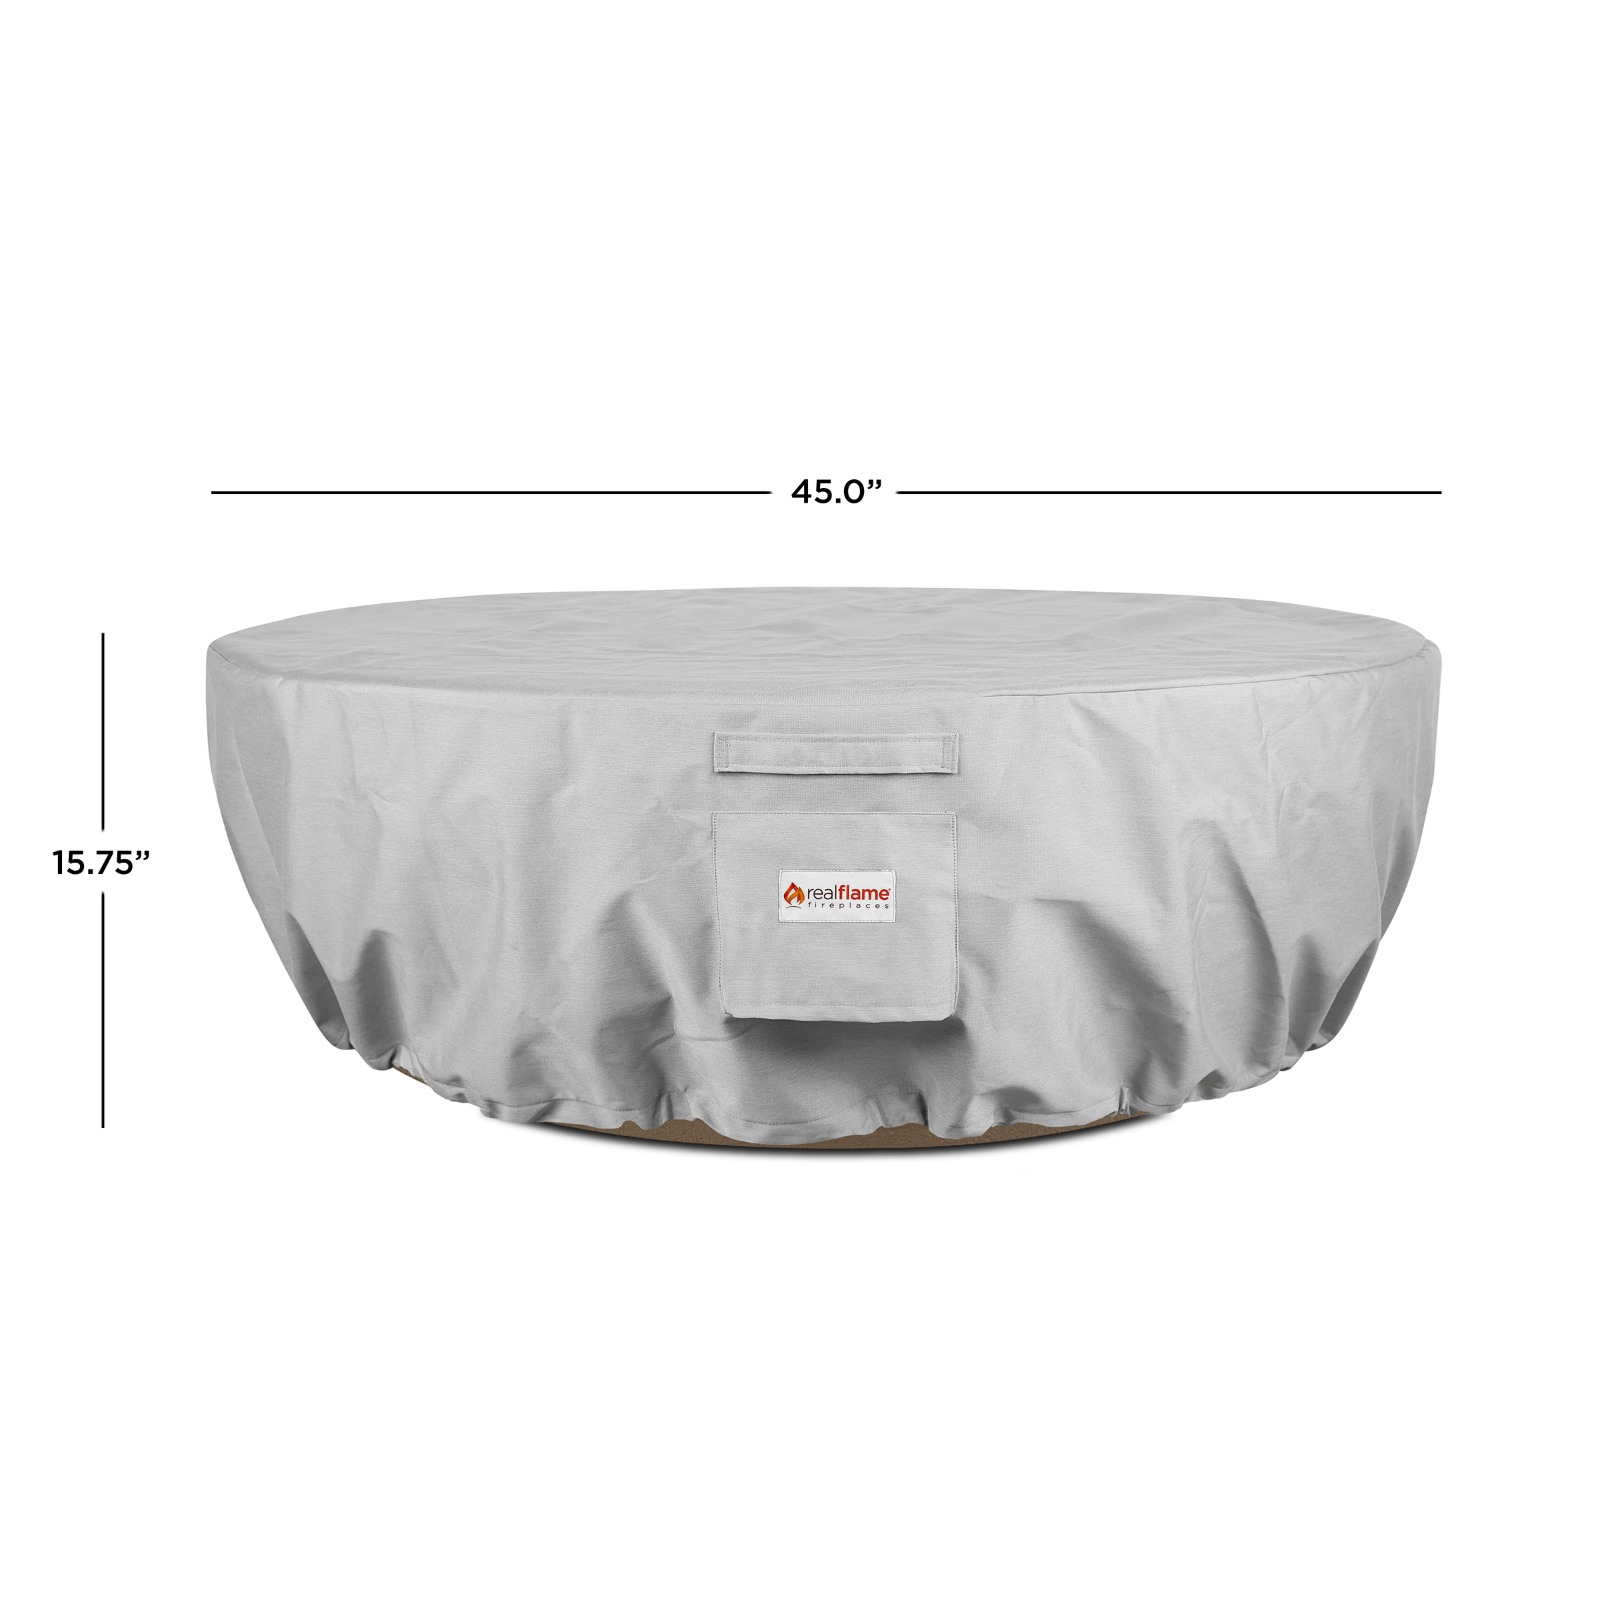 Sedona Round Fire Bowl Protective Fabric Cover with Drawstring dimensions.